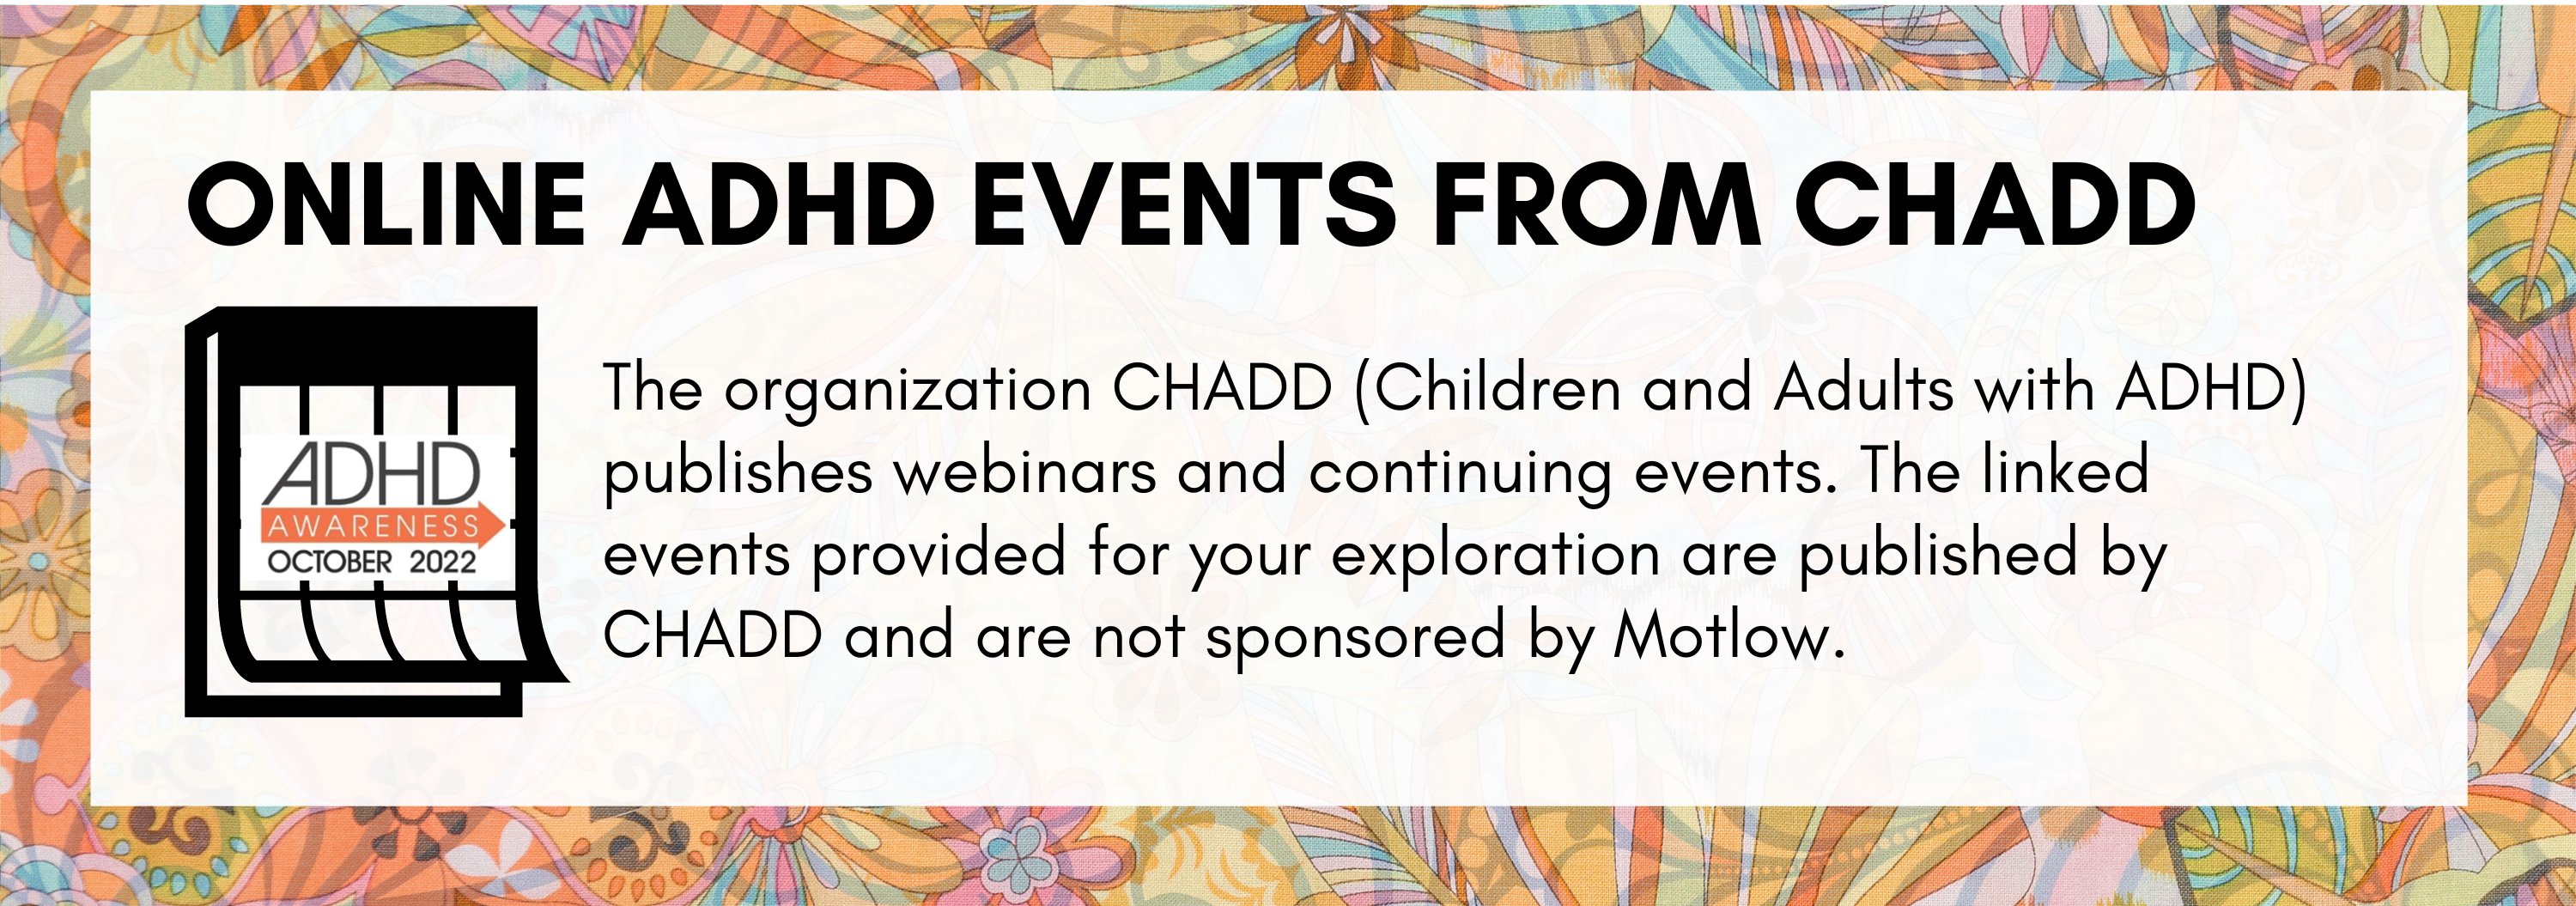 ADHD Awareness Online Events